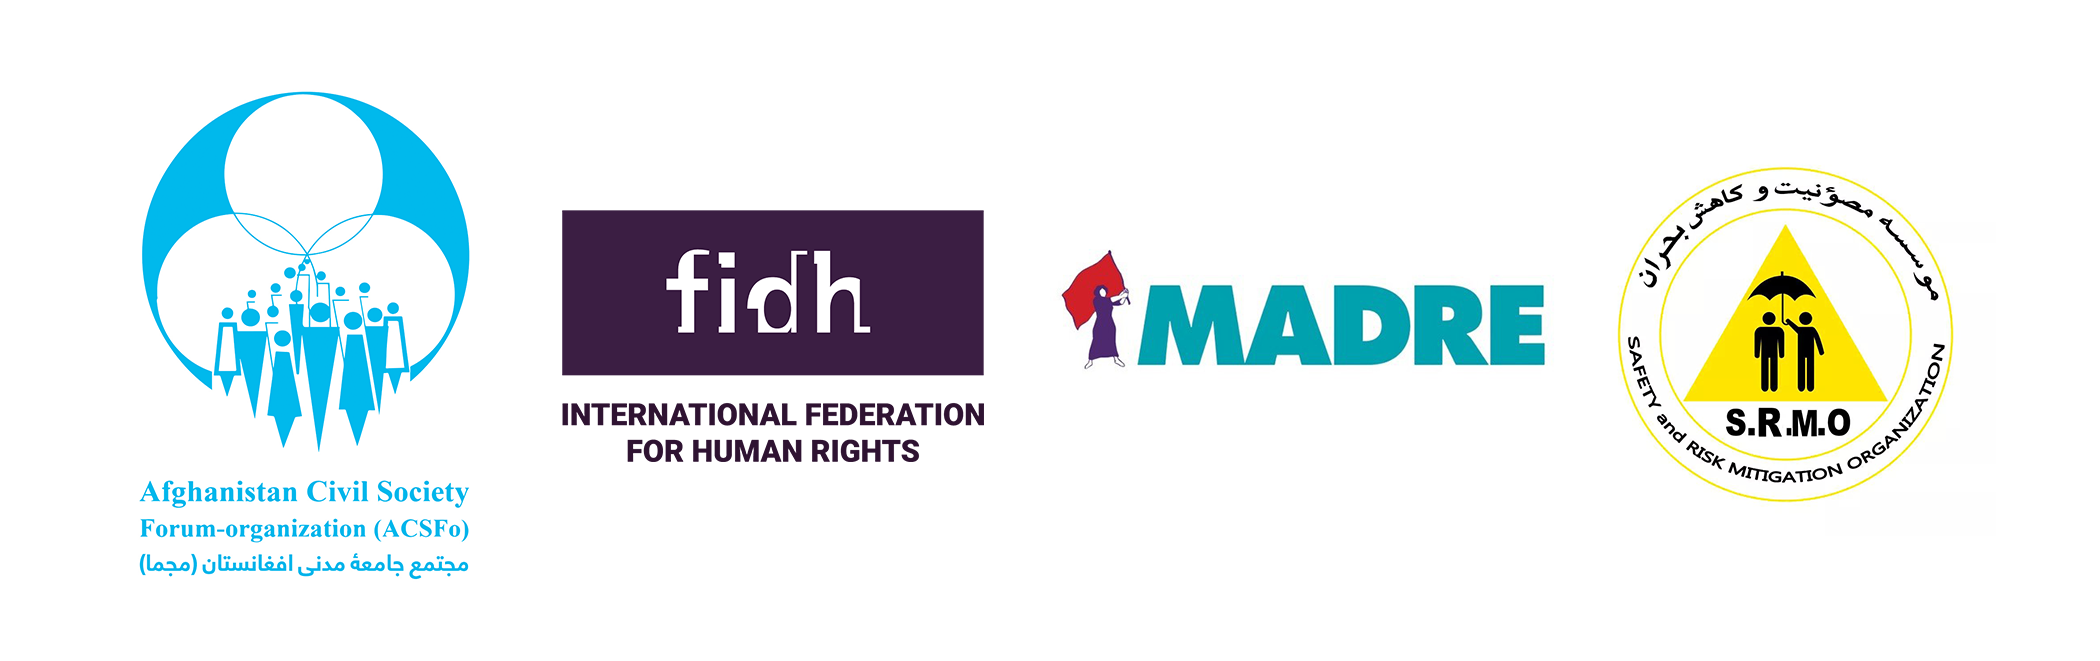 The other founders include: the Afghan Civil Society Forum (ACSF), the Safety and Risk Mitigation Organization (SRMO), MADRE, and the International Federation for Human Rights (FIDH). 